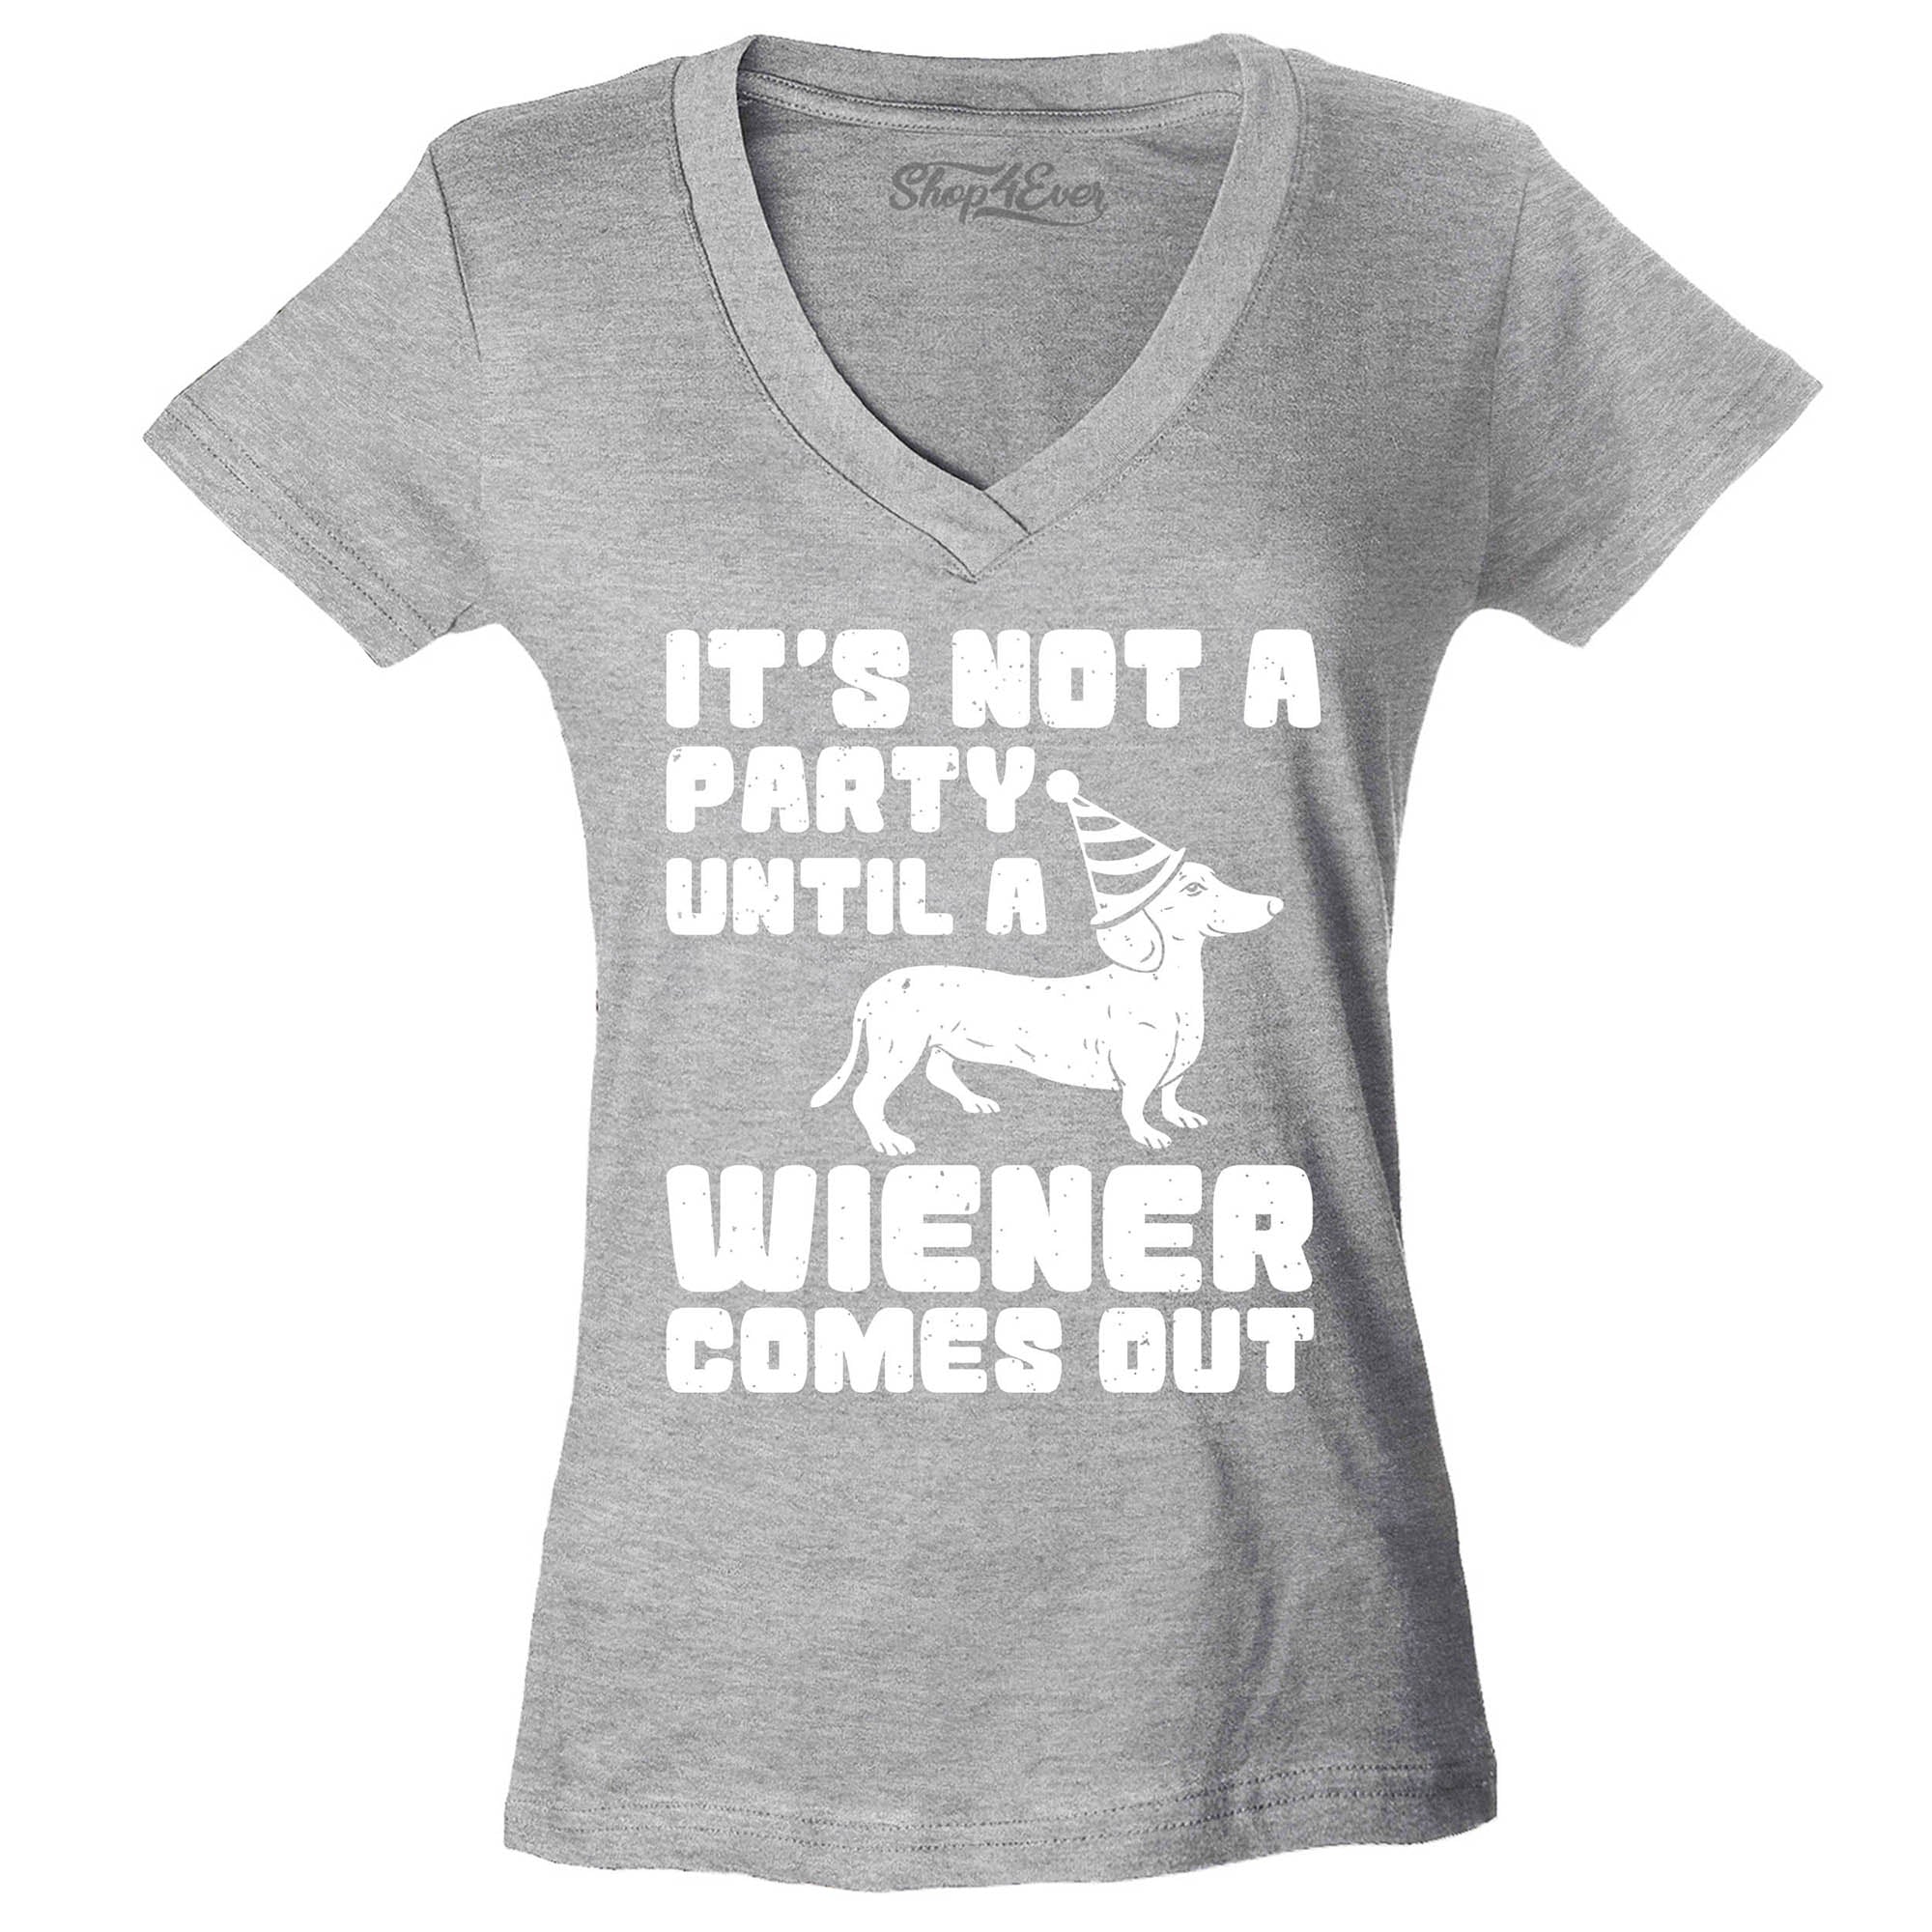 It's Not a Party Until The Wiener Comes Out Funny Dachshund Women's V-Neck T-Shirt Slim Fit